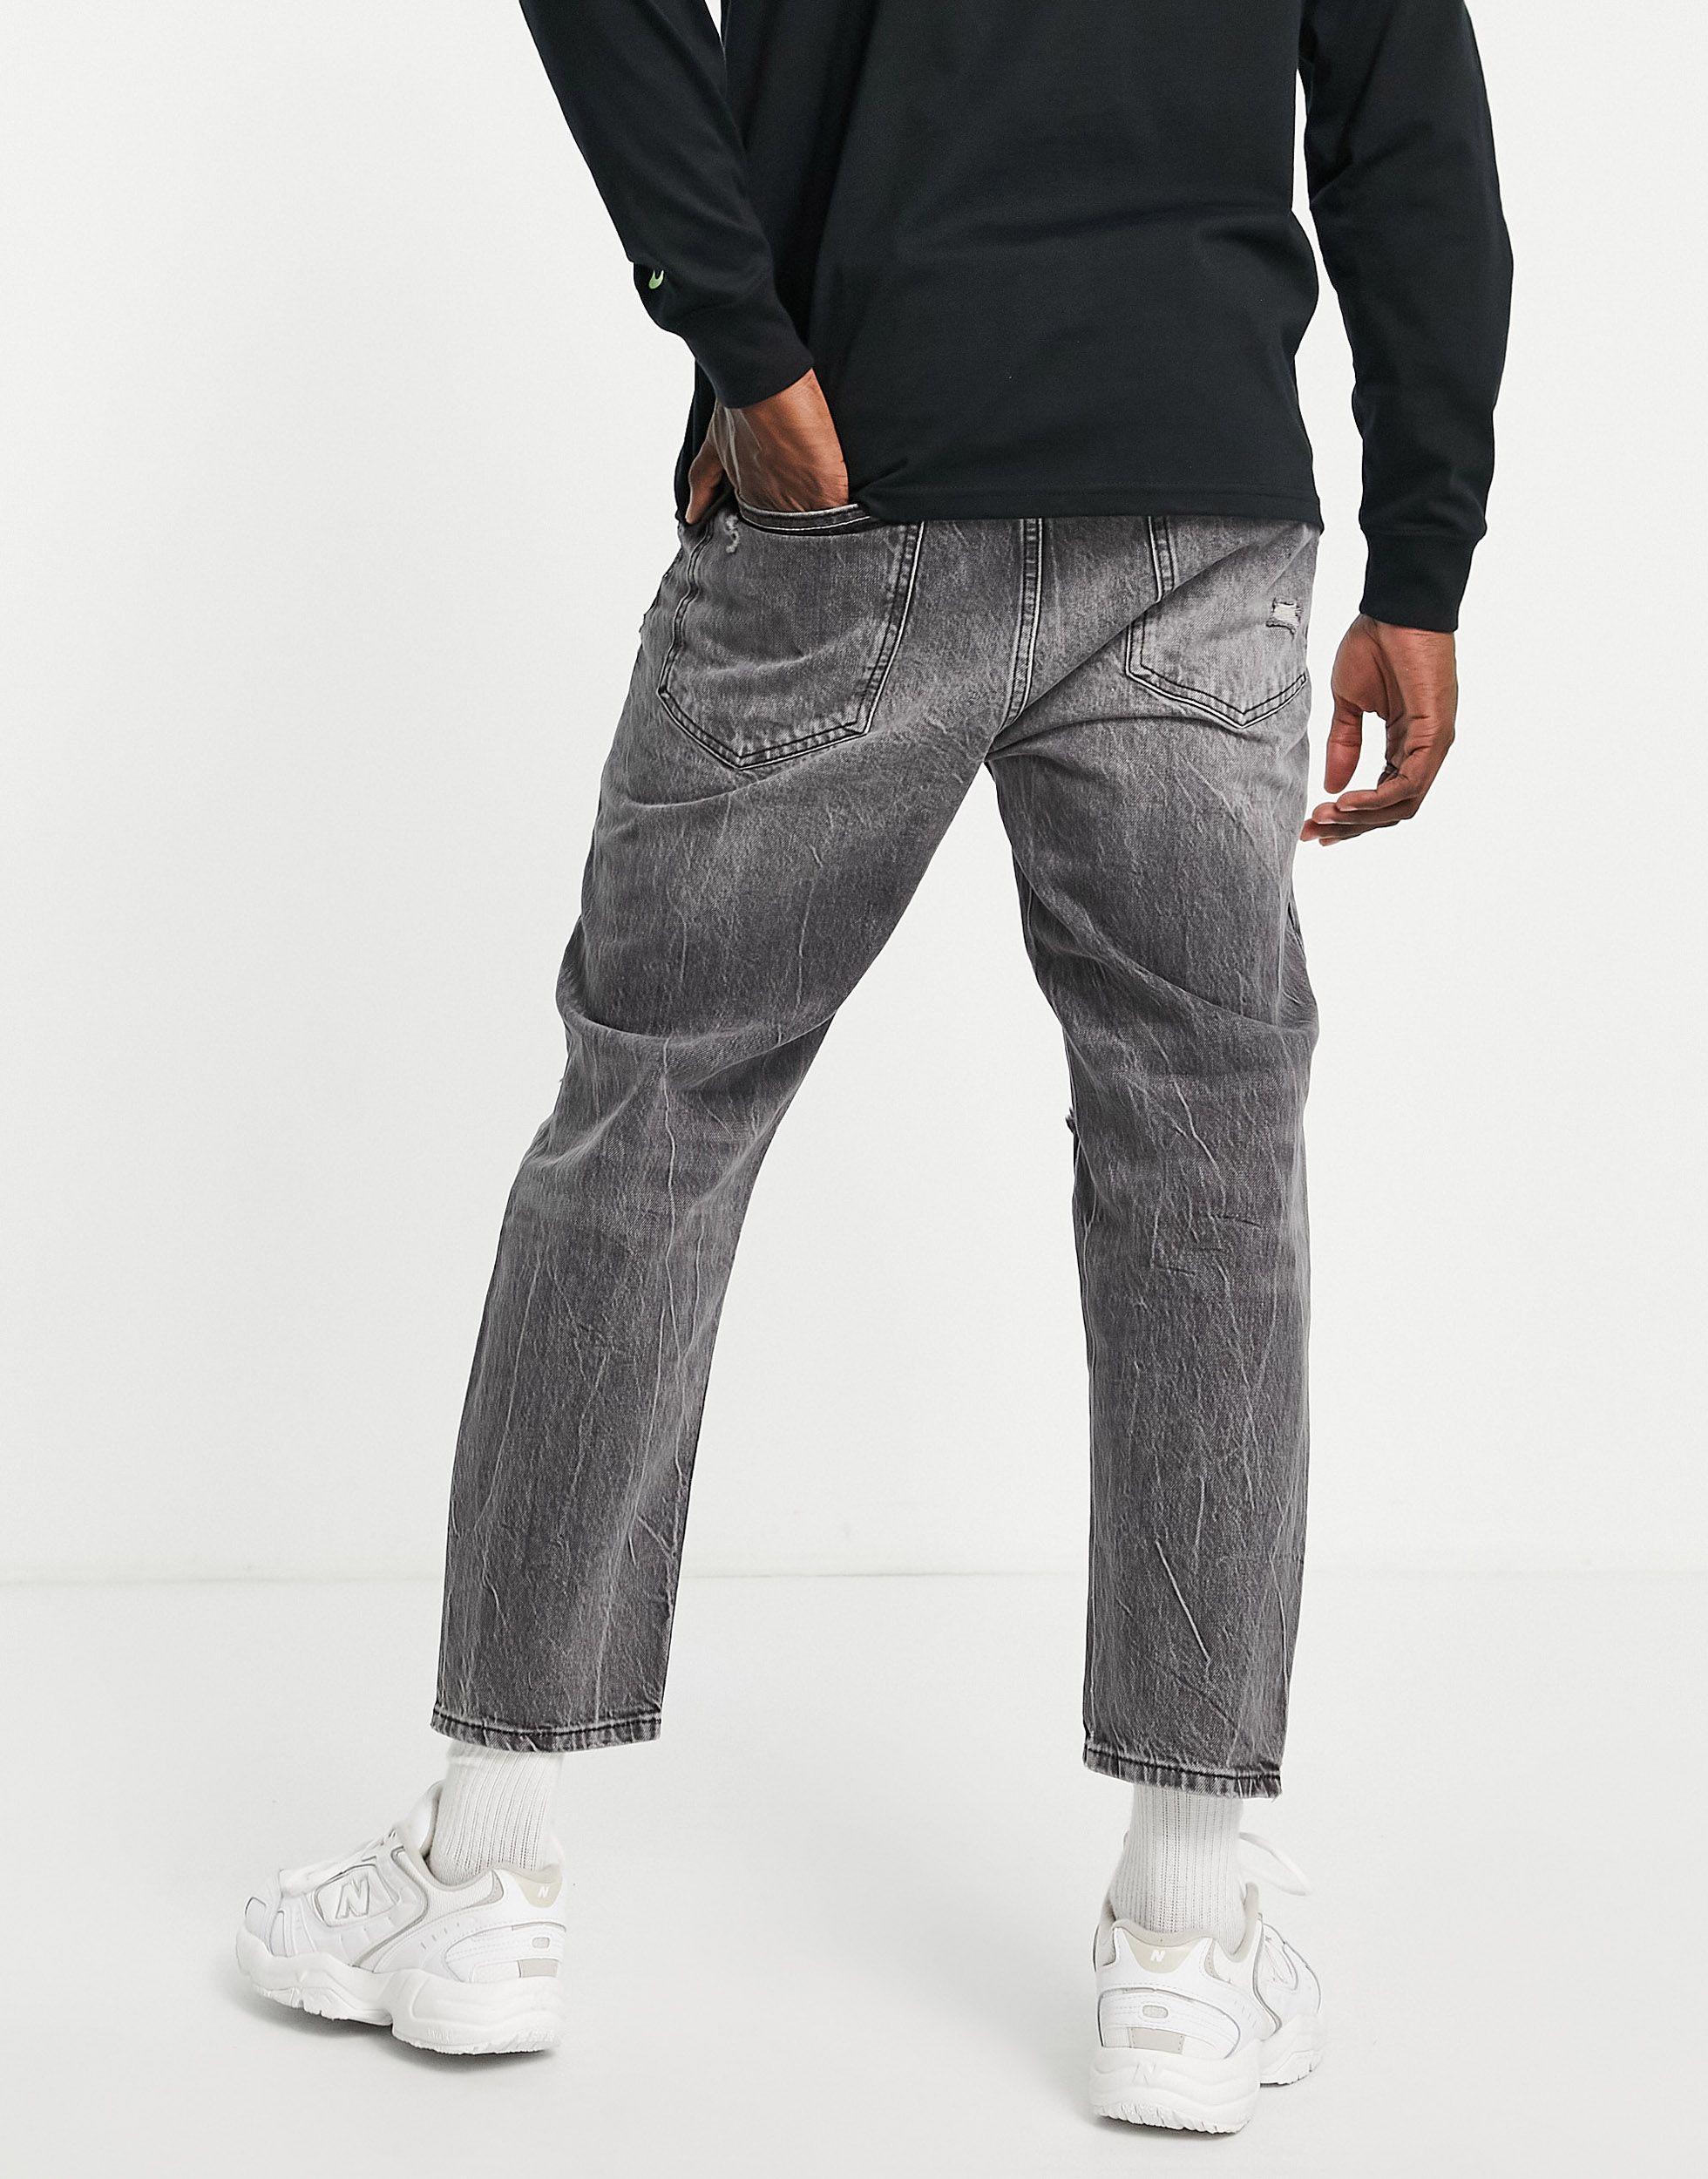 Antipoison forvirring Papua Ny Guinea Pull&Bear Relaxed Fit Jeans in Gray for Men | Lyst